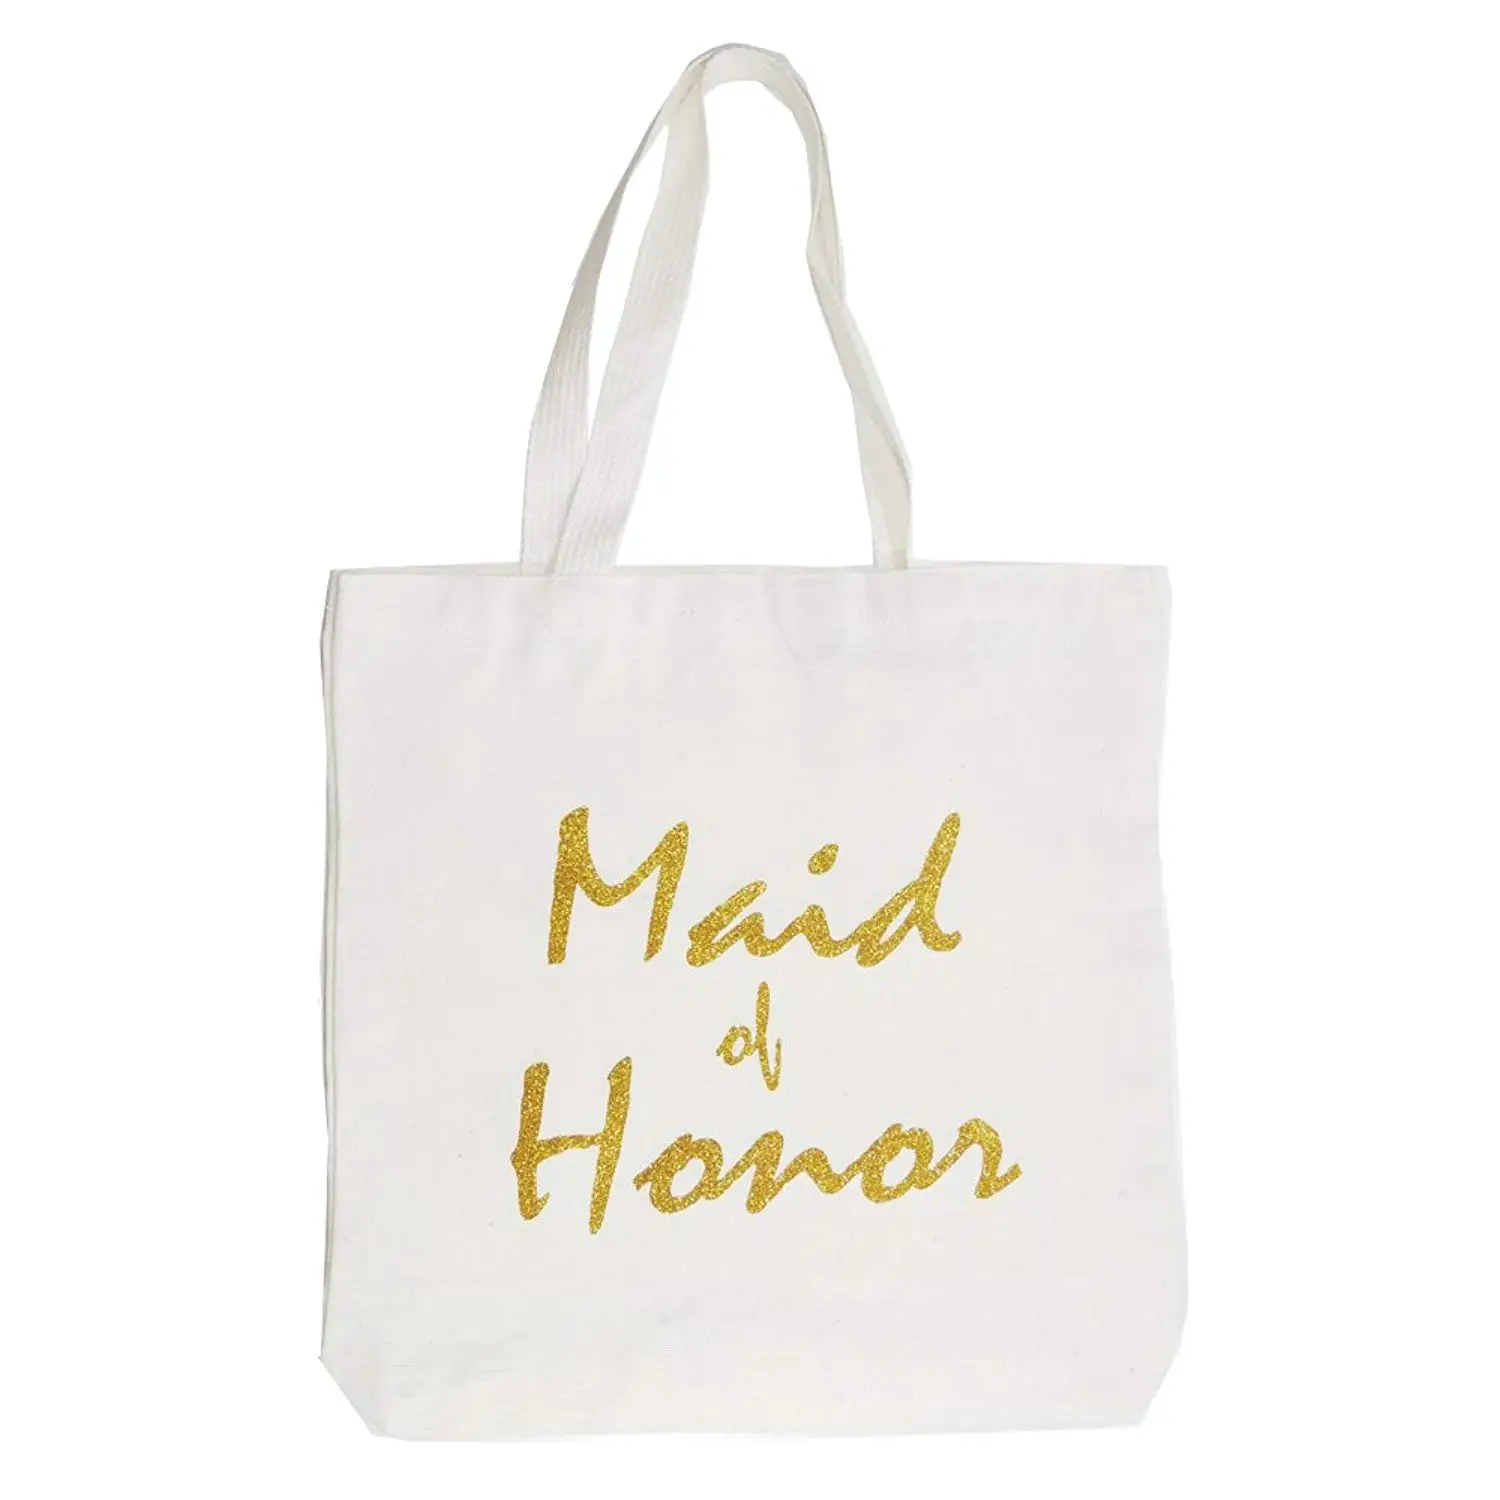 Cheap Wedding Canvas Tote Find Wedding Canvas Tote Deals On Line At